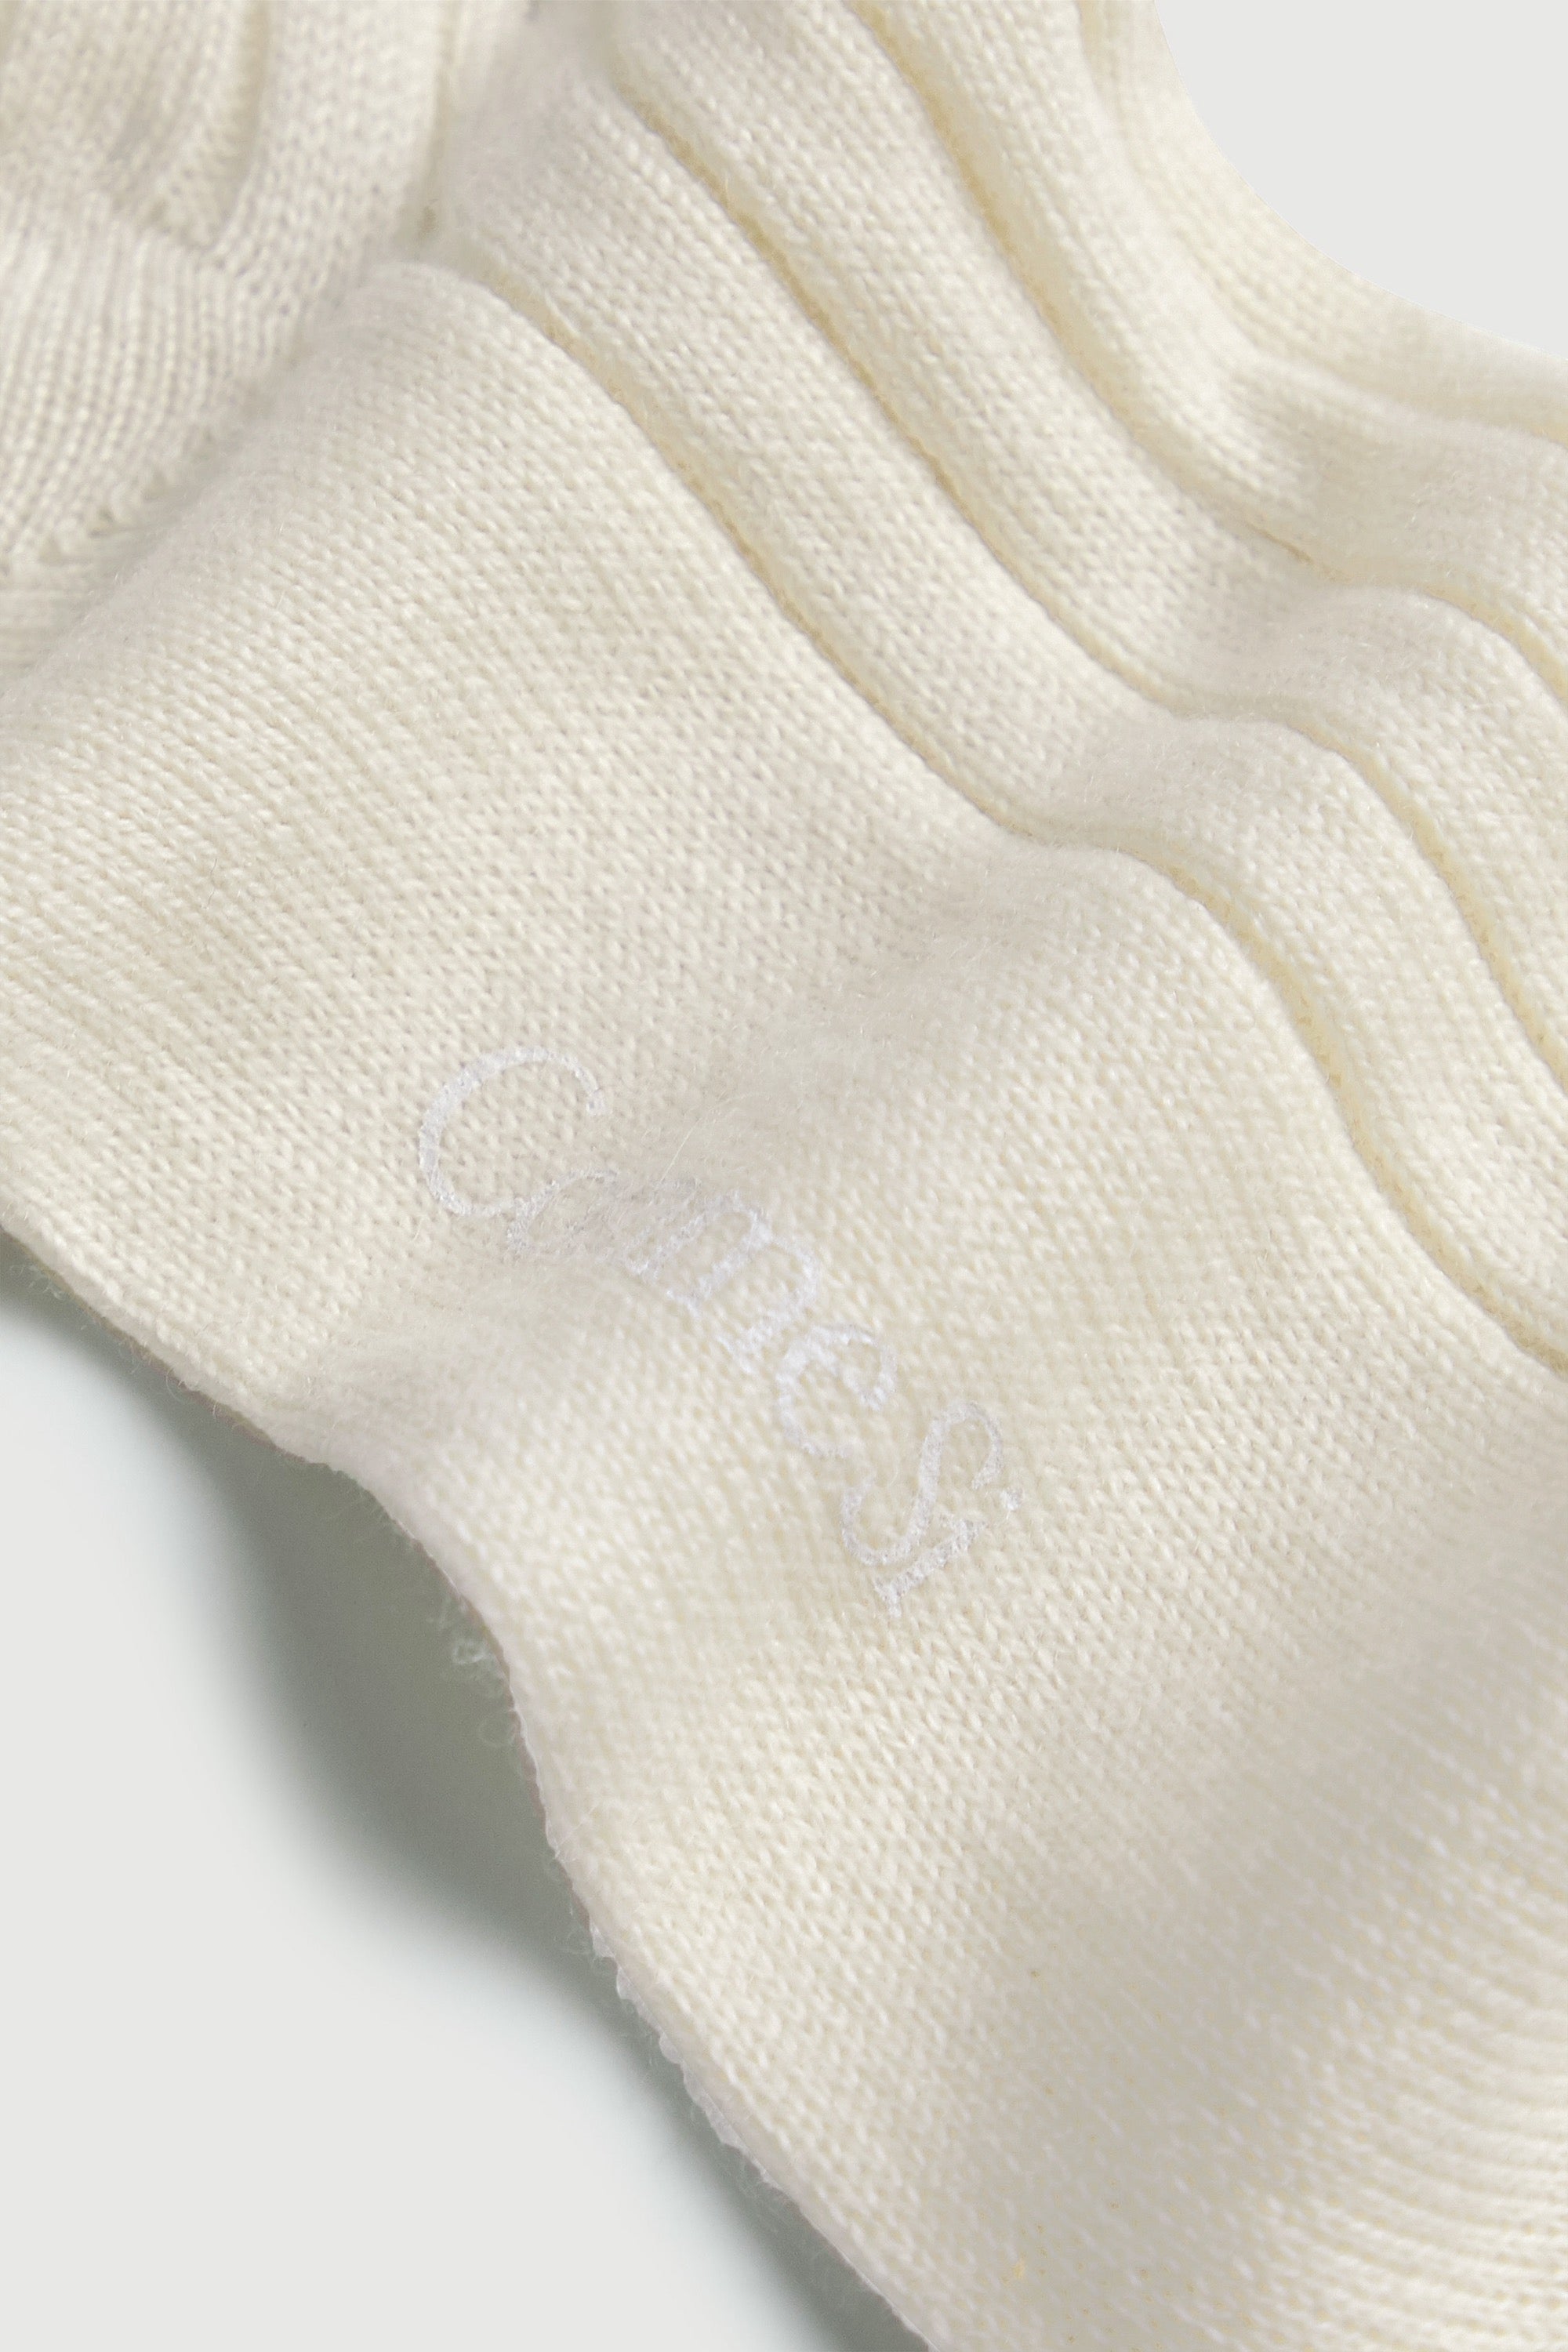 Footbed detail, The Danielle Sock in Cream, Mongolian Cashmere